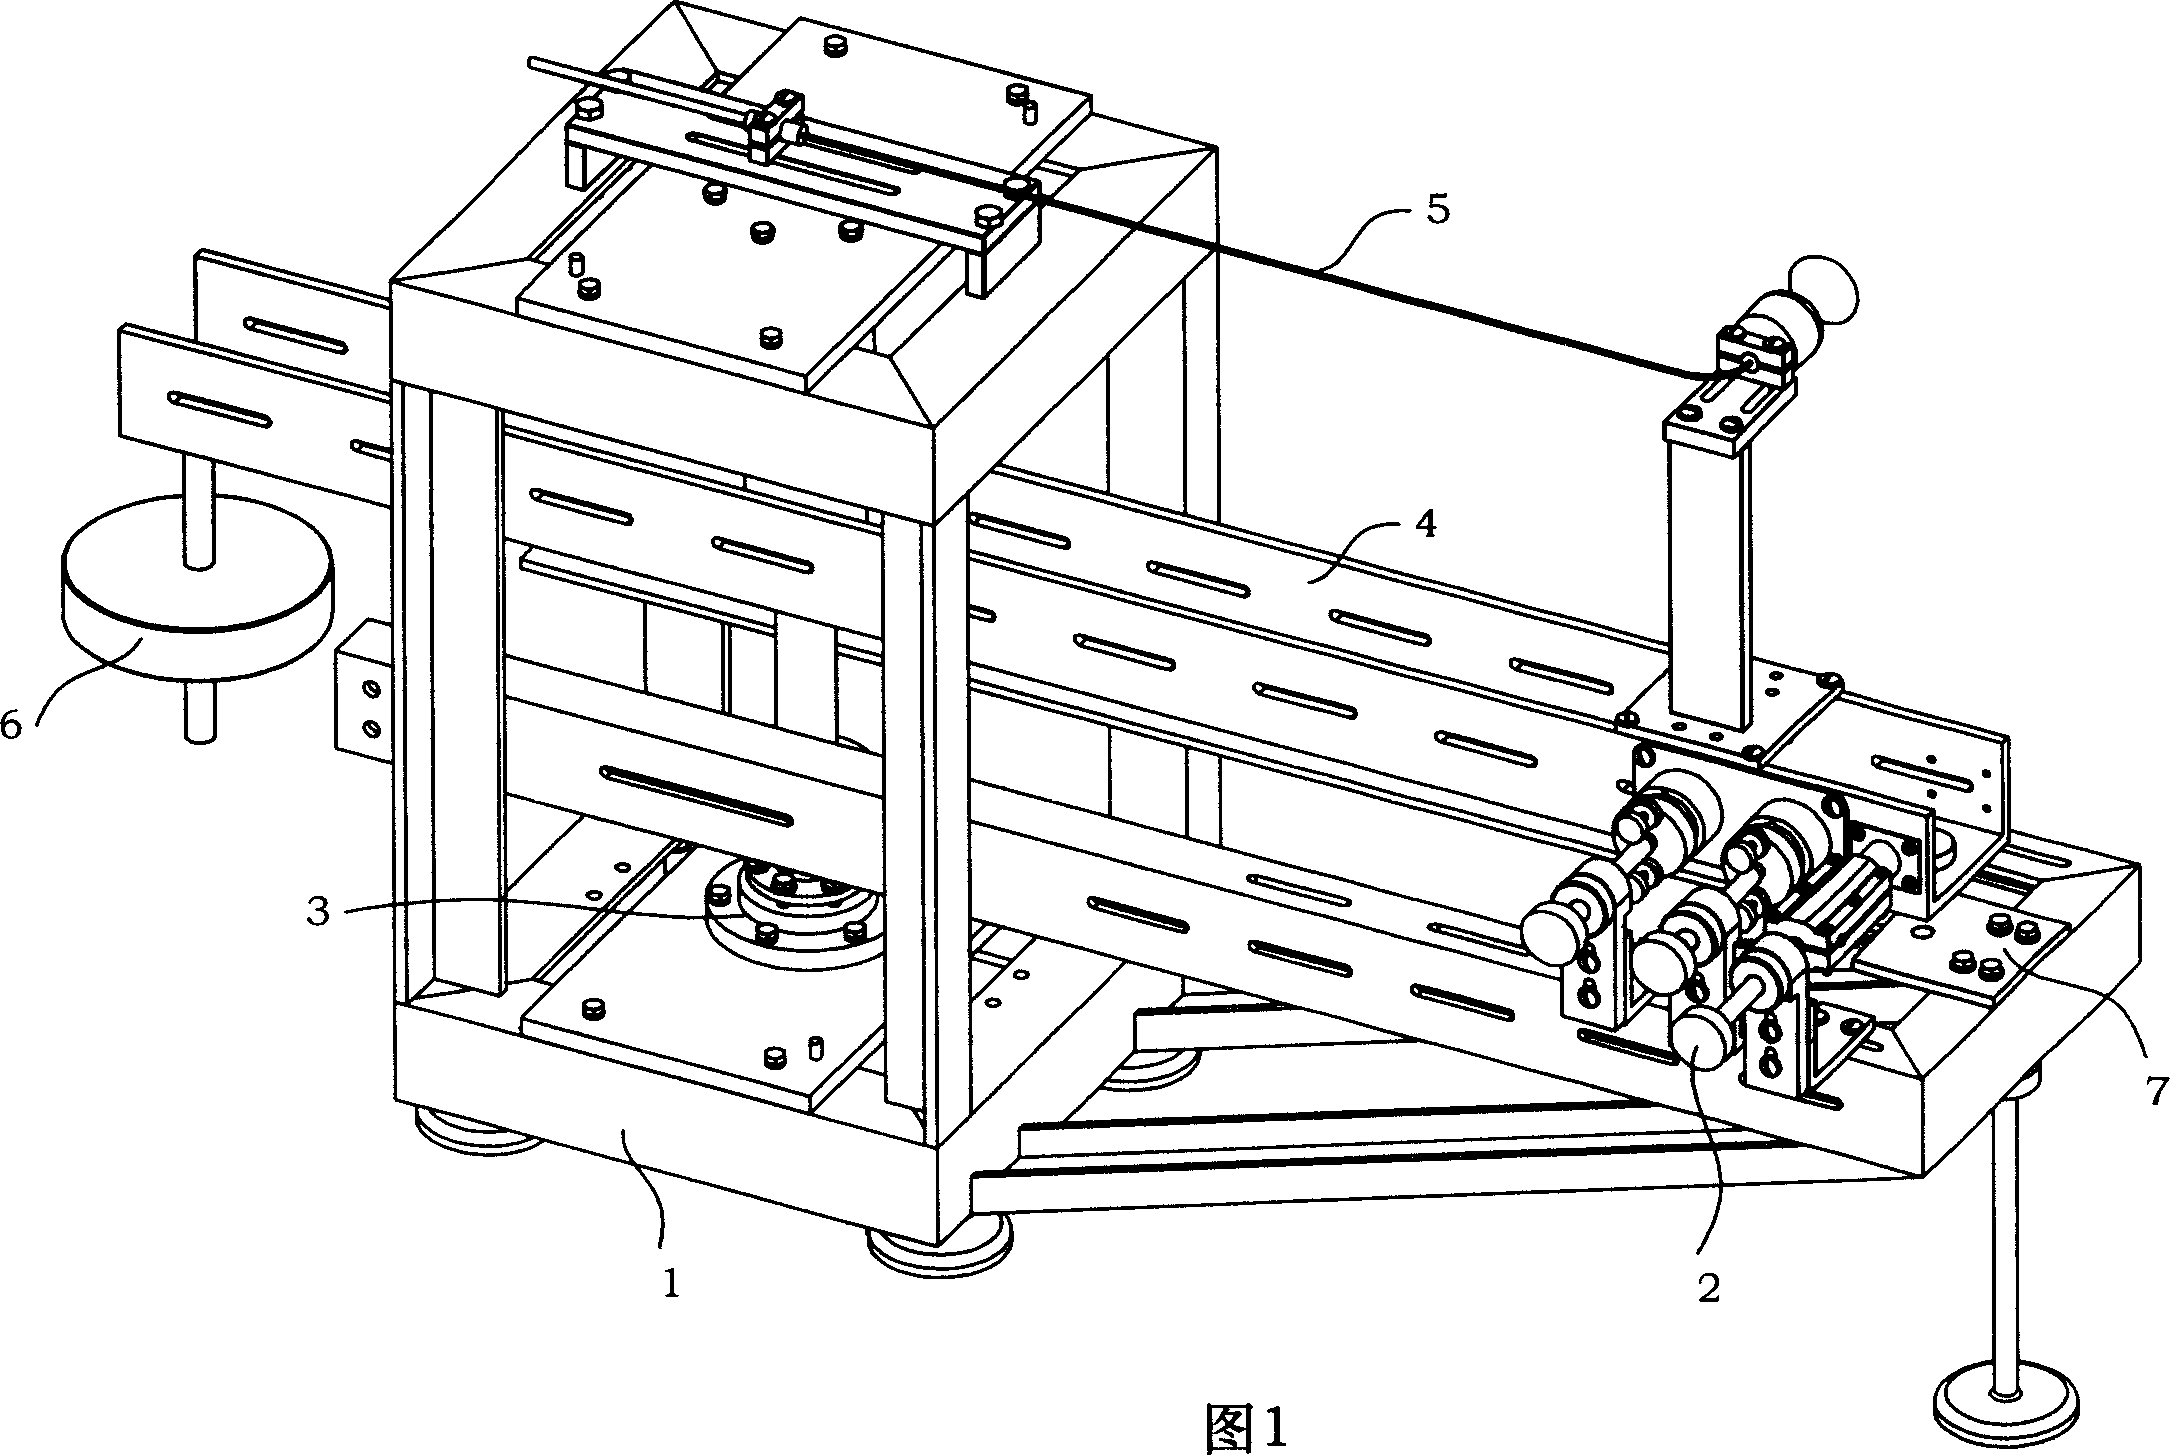 System for measuring thrust suitable to thrust engine with tiny space